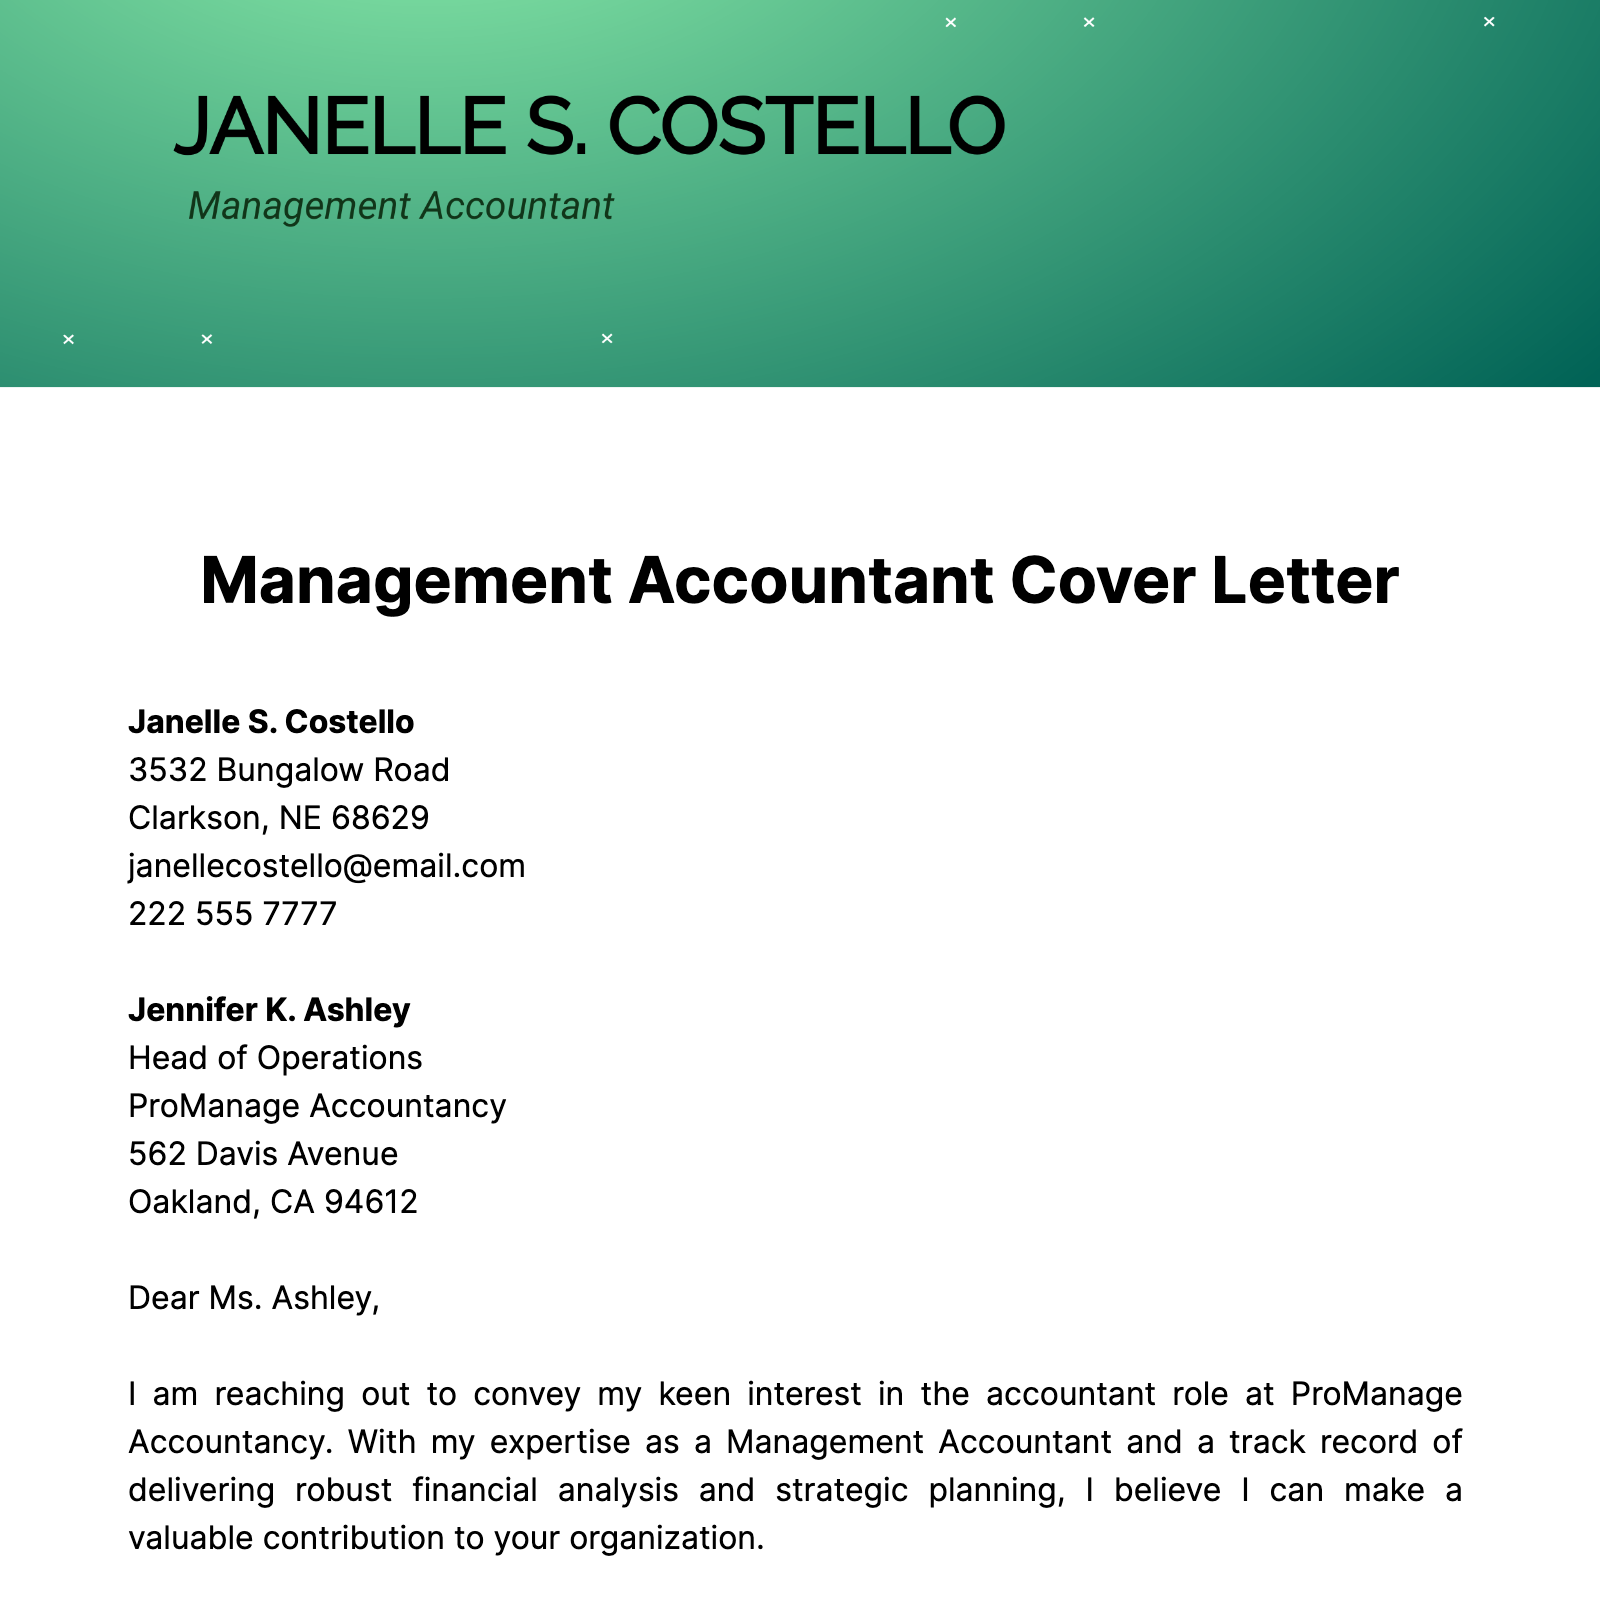 Management Accountant Cover Letter Template